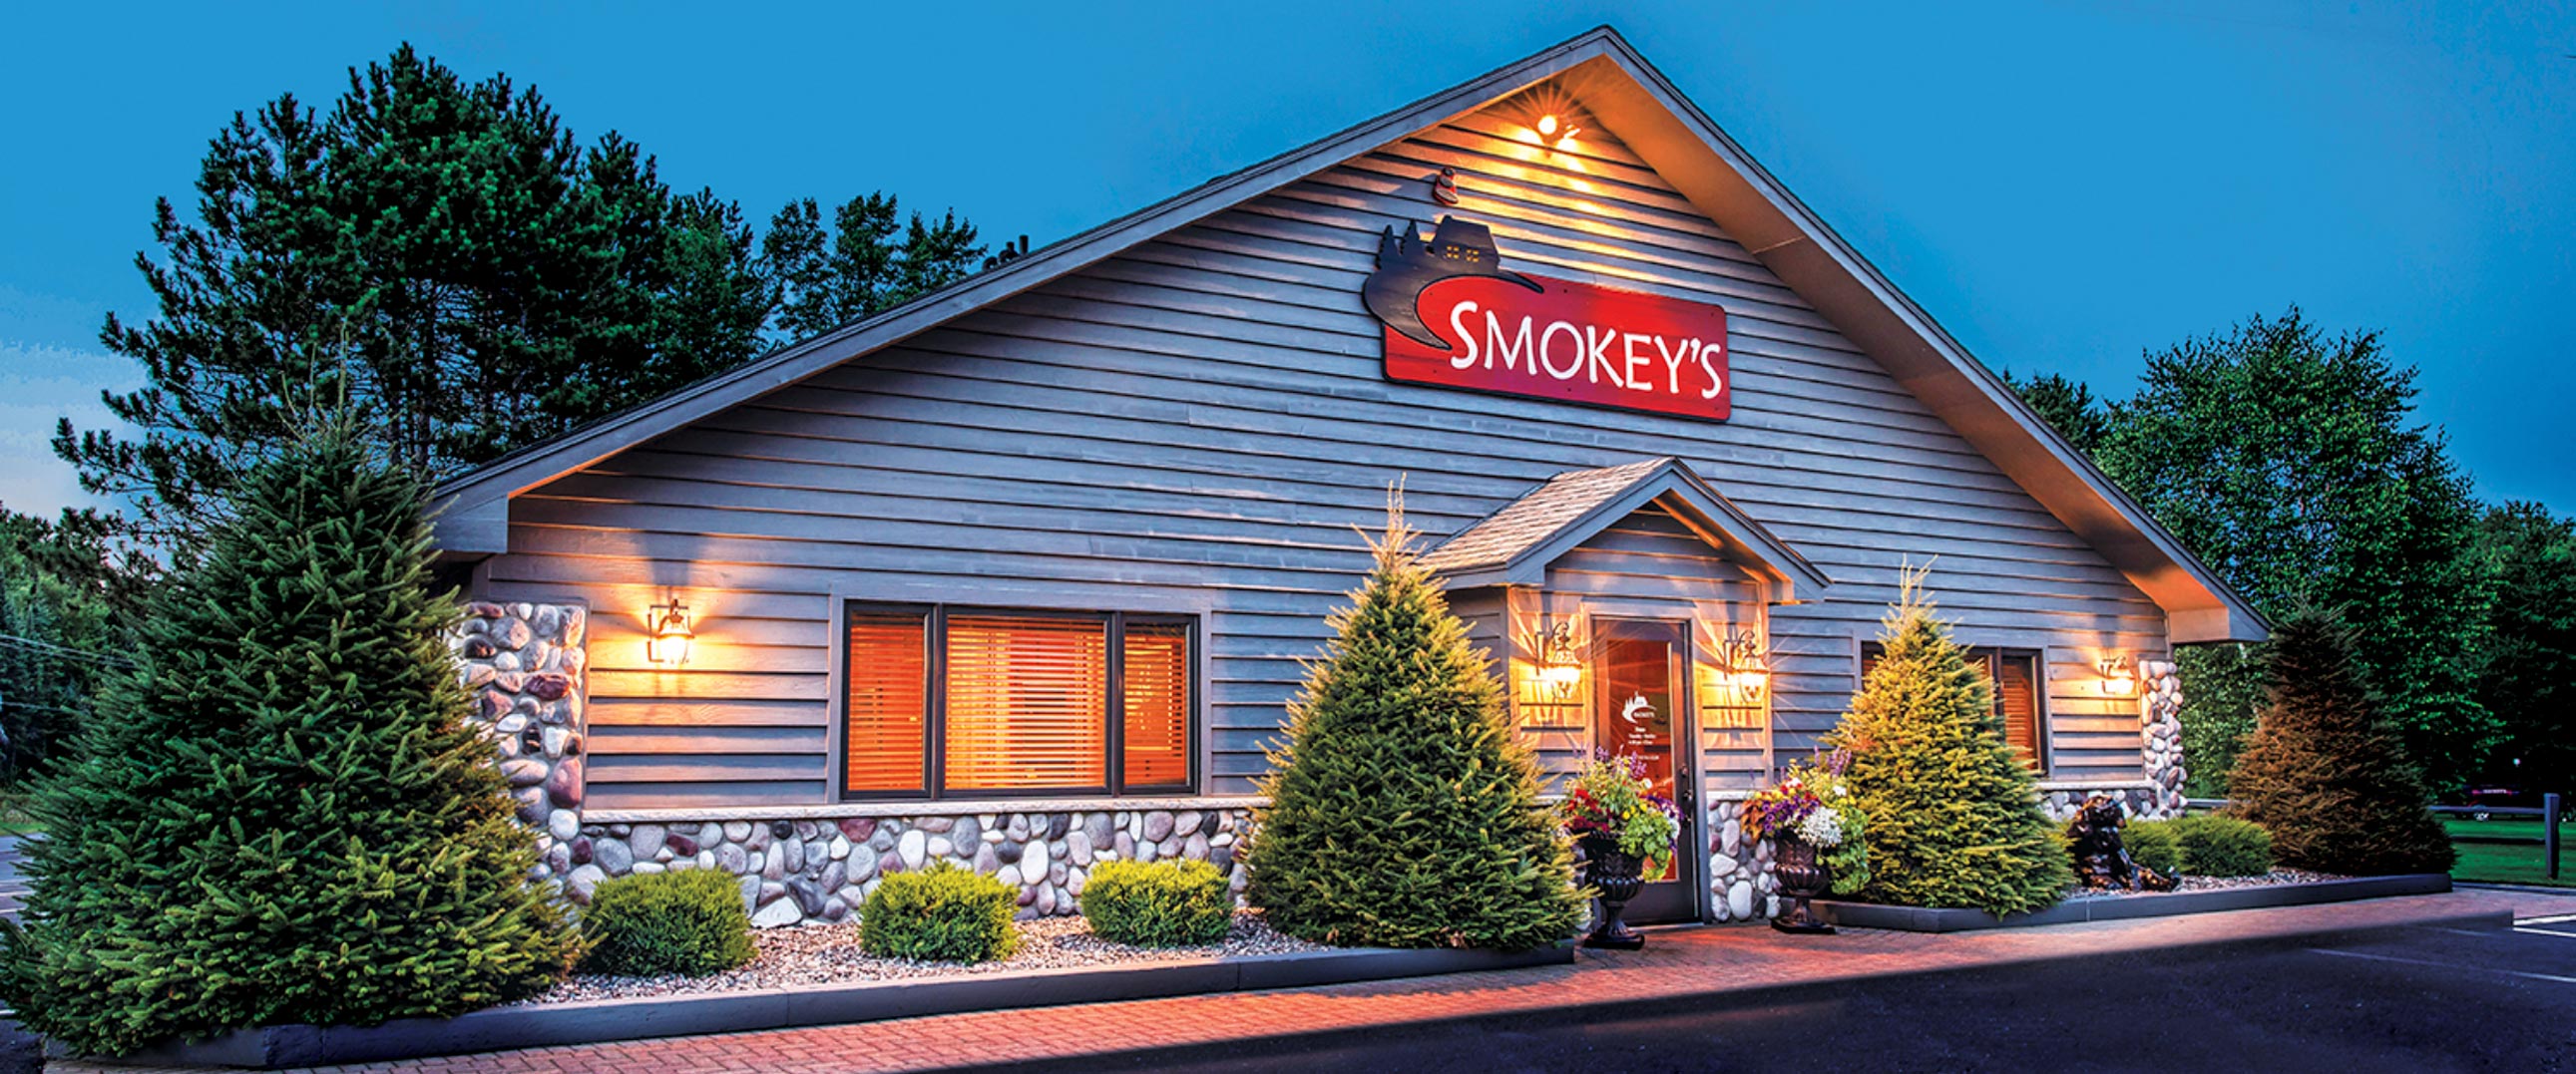 Smokey's Restaurant and Supper Club, Manitowish Waters, WI